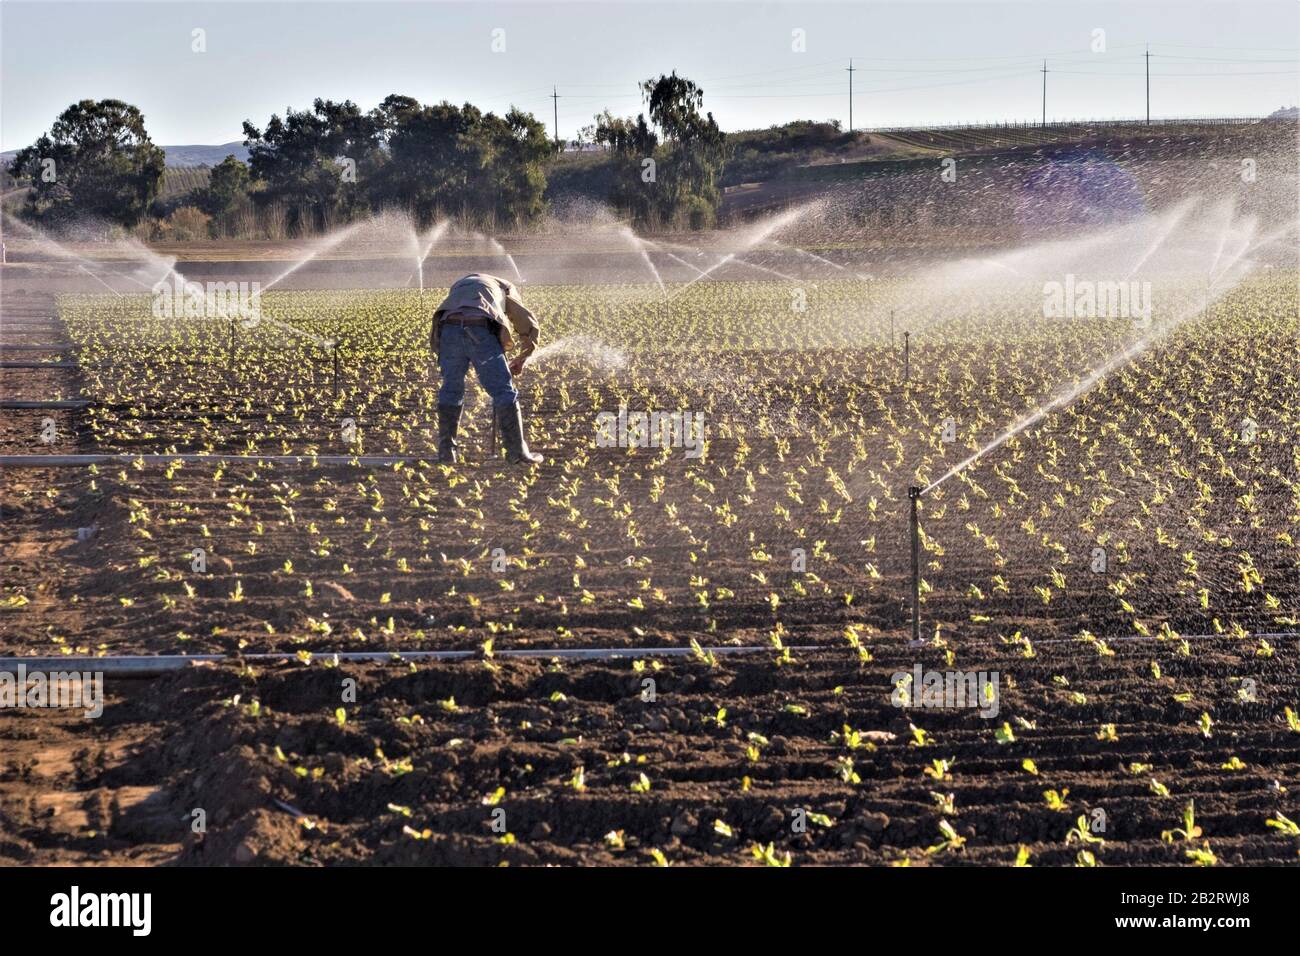 Farmer adjusting sprinkler irrigation system on newly planted crop during the 7 year drought in California central coastal area Stock Photo